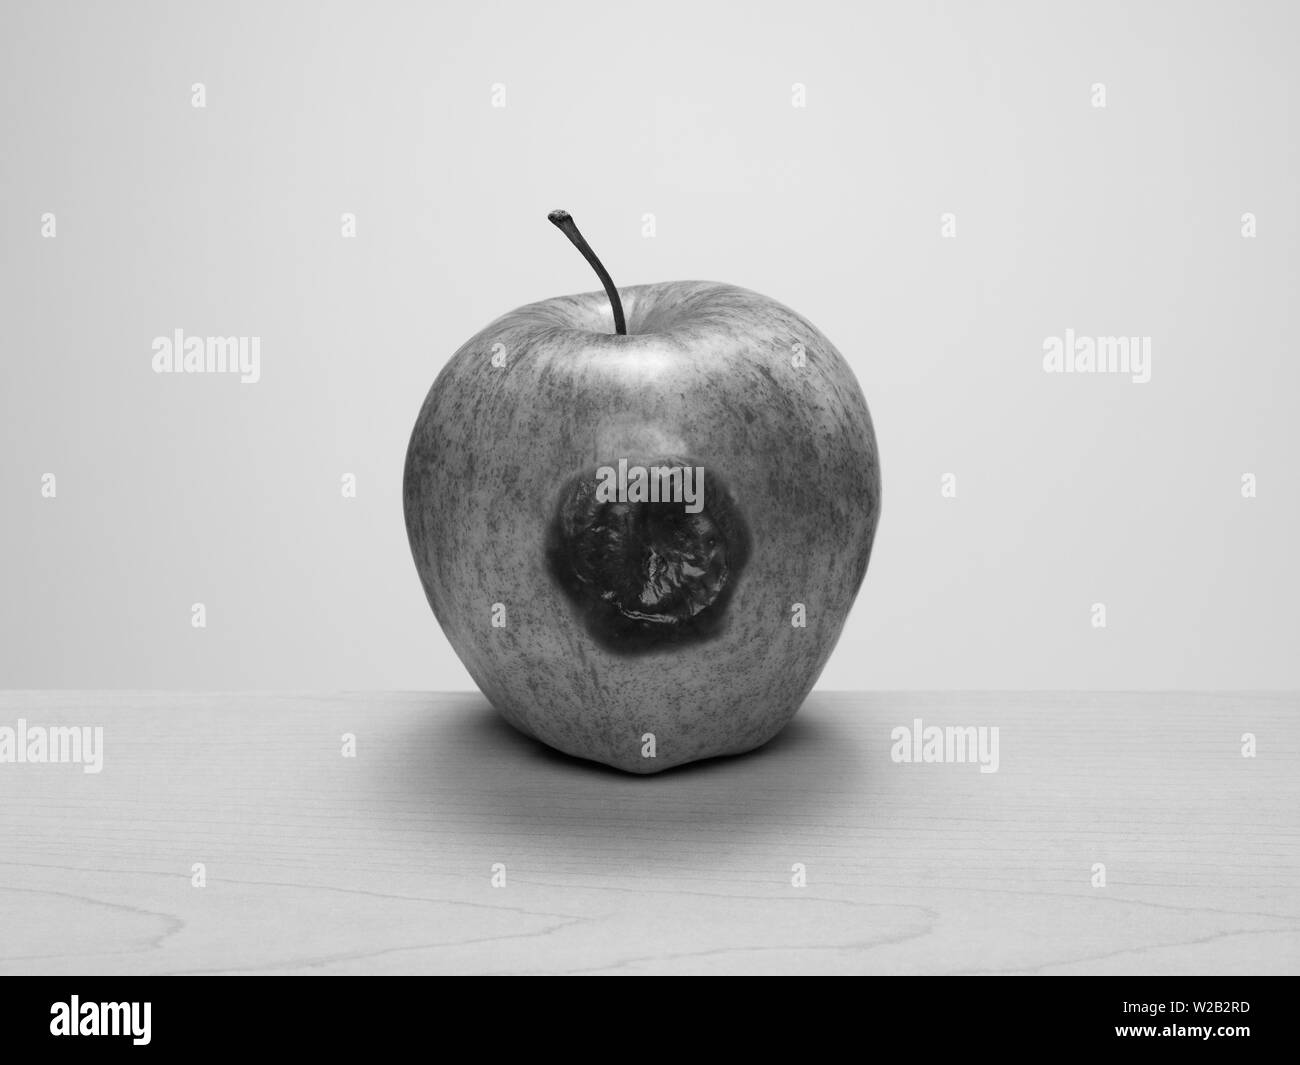 Bruised apple starting to rot on wood table. Black and white. Concept: rotten to the core, one bad apple... Stock Photo